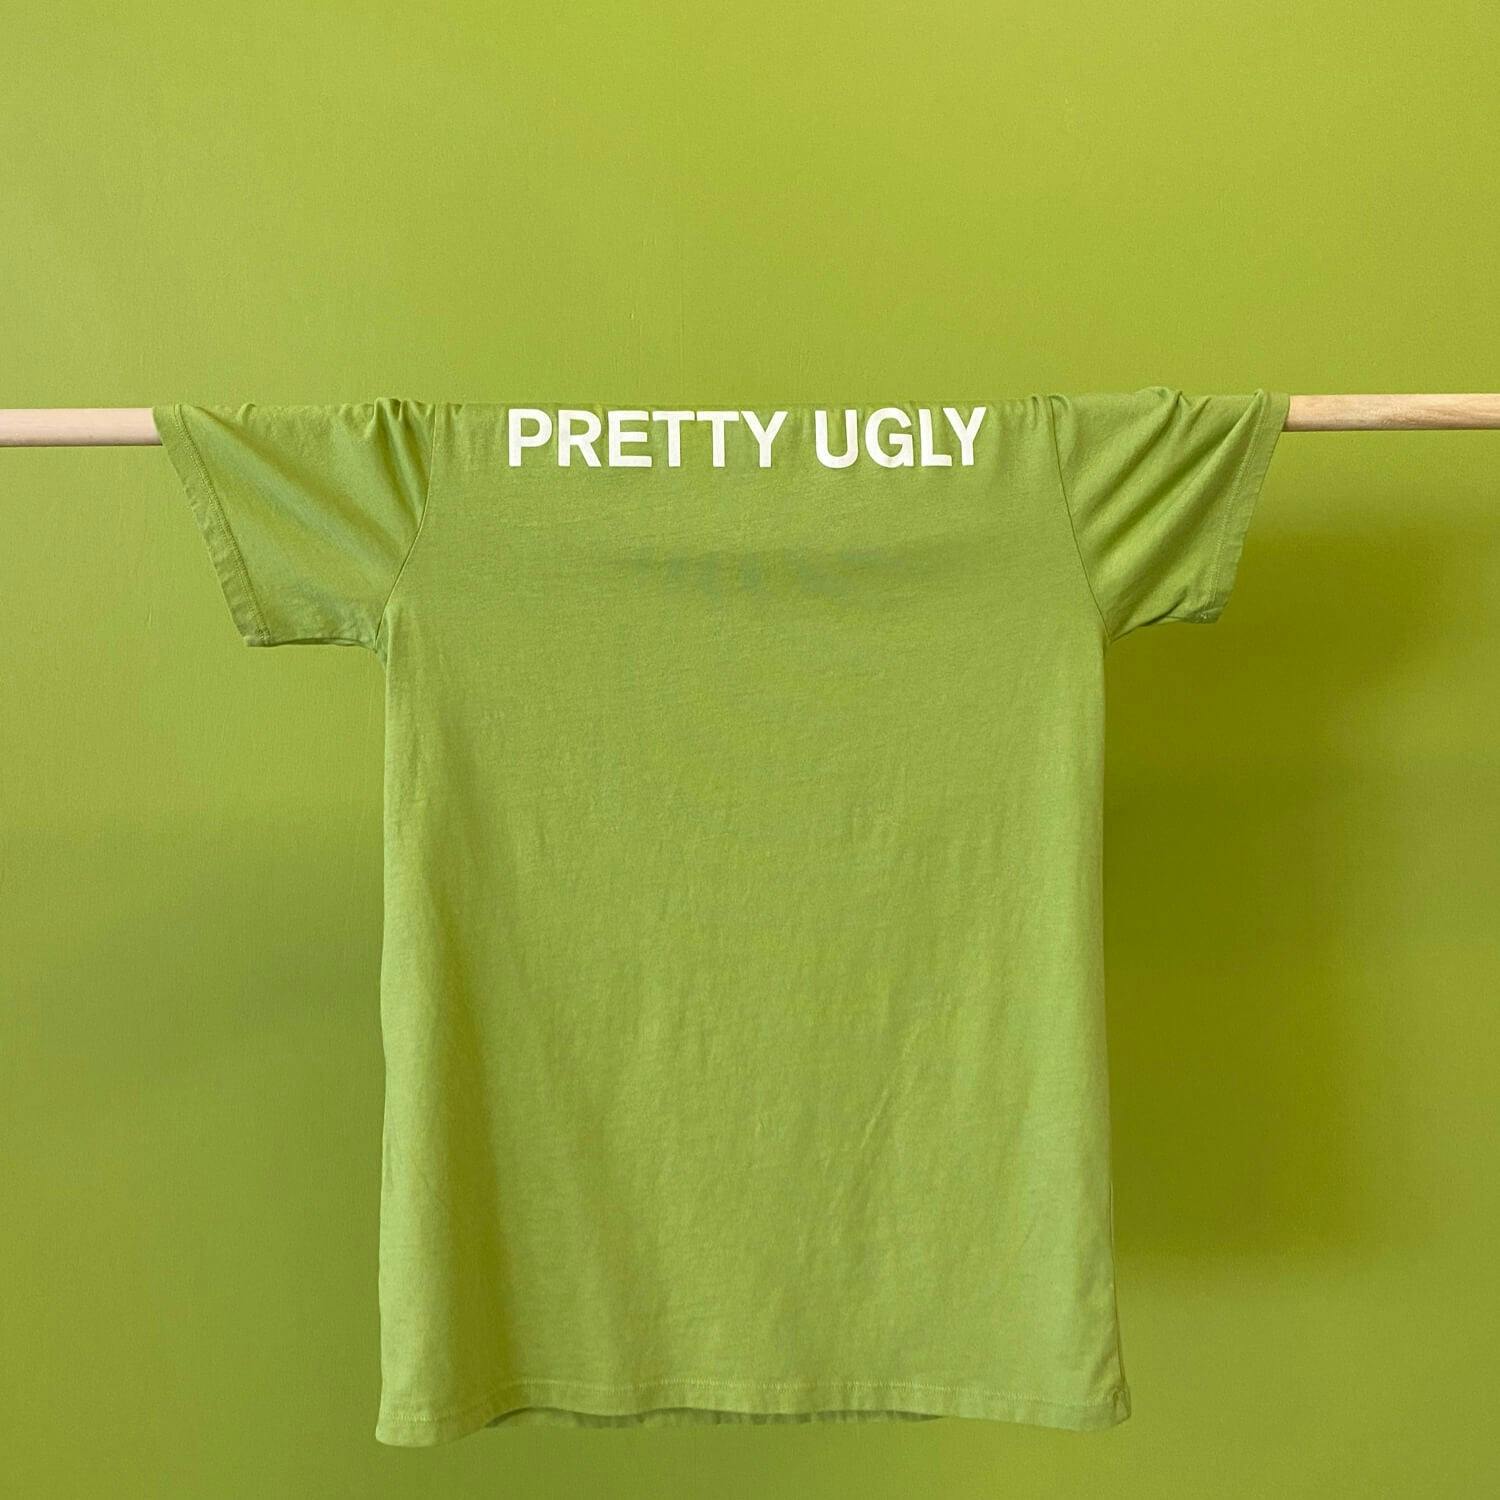 A t-shirt with the words "PRETTY UGLY" handing in front of a wall painted with PRETTY UGLY